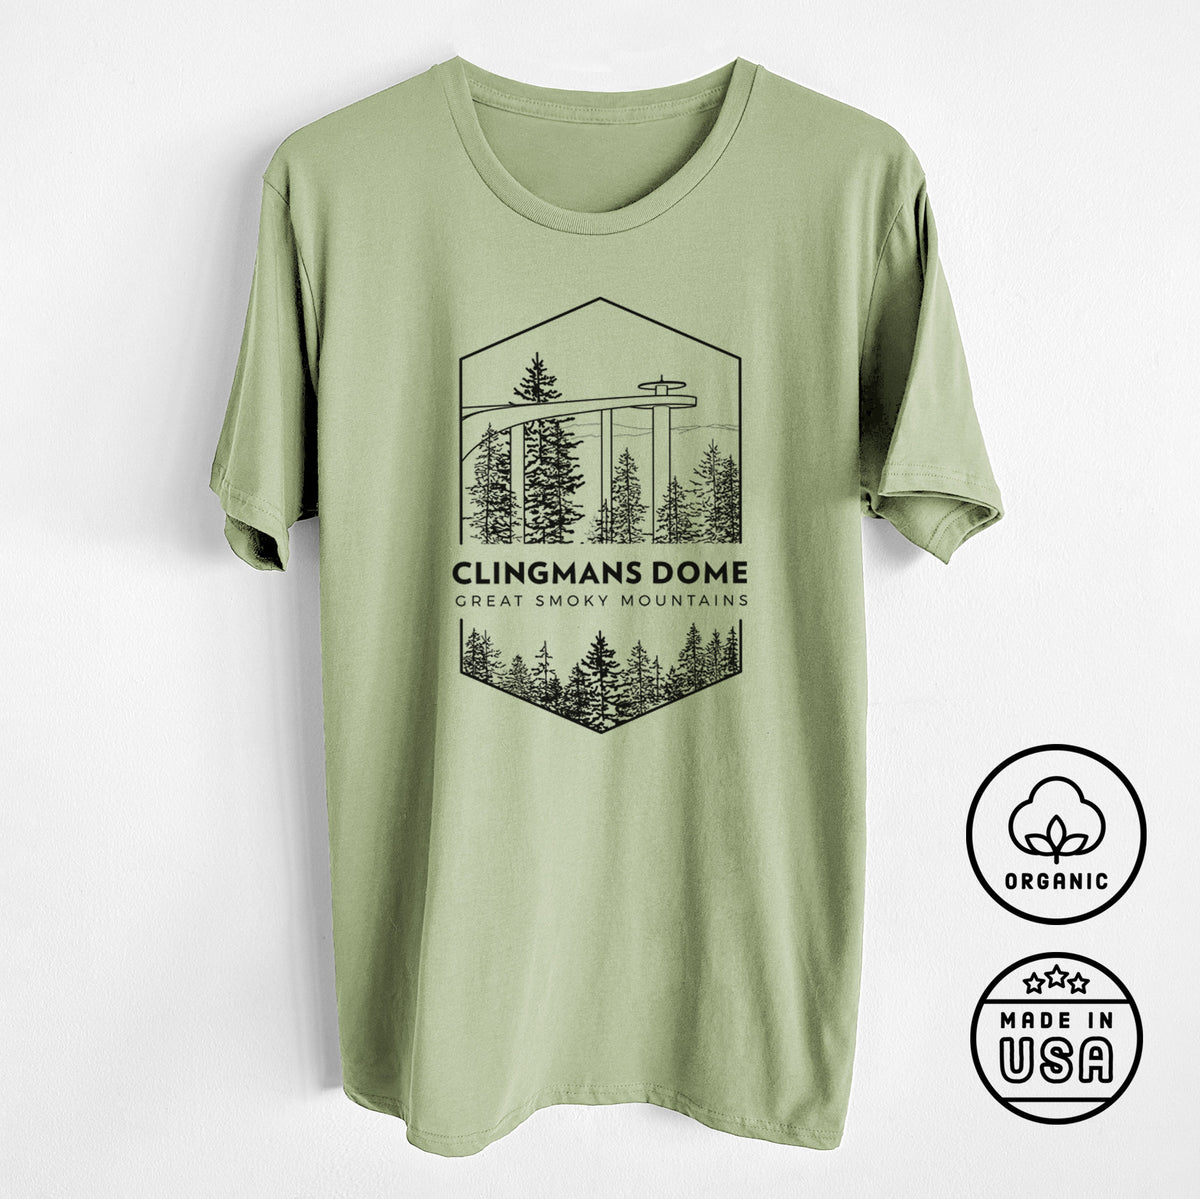 Clingmans Dome - Great Smoky Mountains National Park - Unisex Crewneck - Made in USA - 100% Organic Cotton